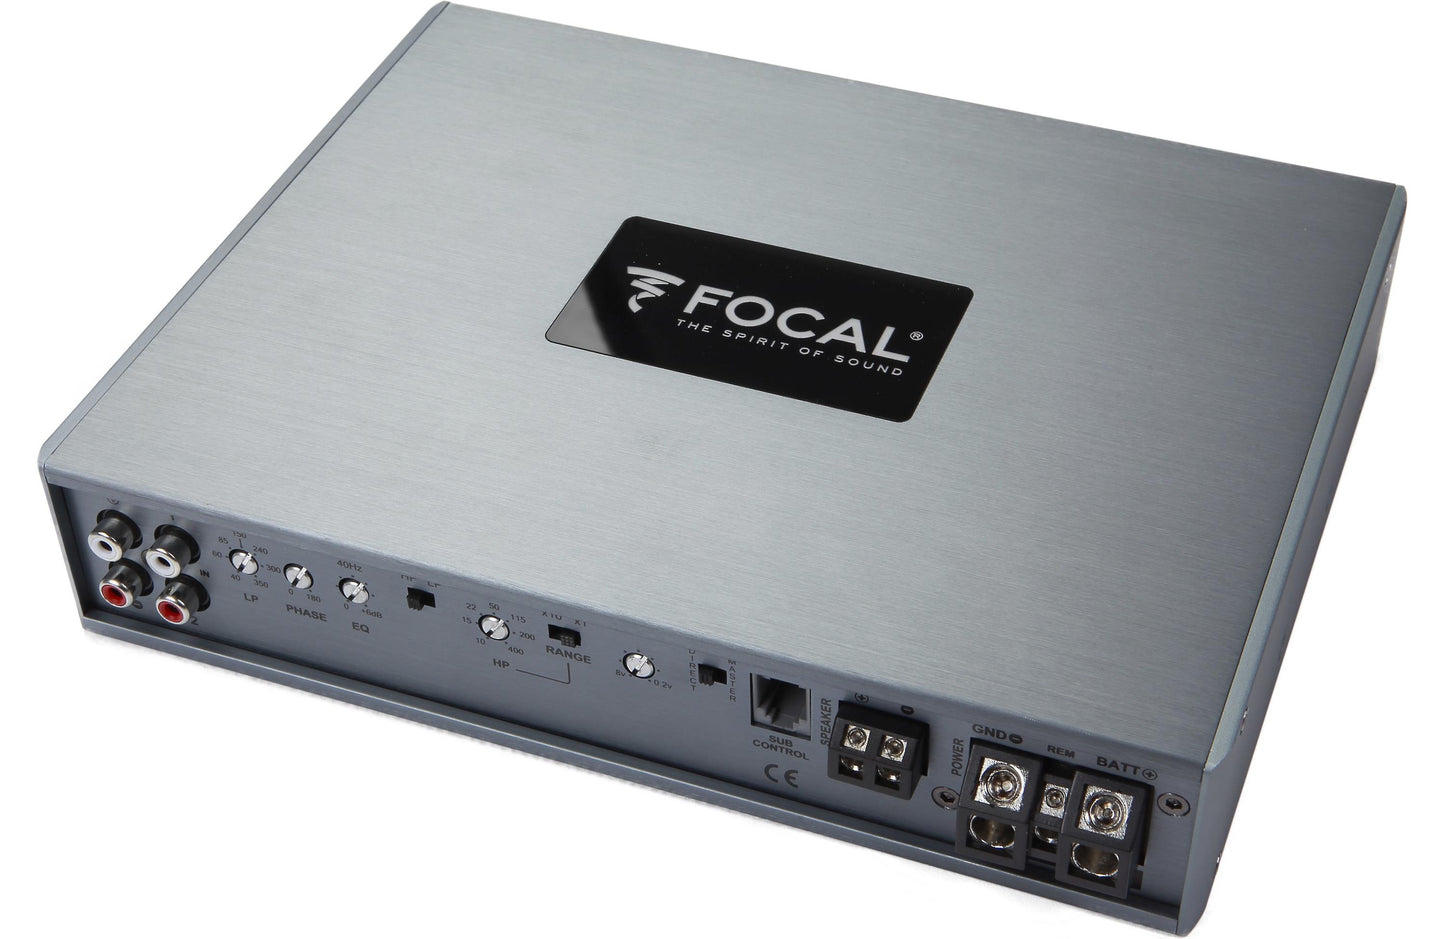 Focal FDP 1.900 Mono amplifier — 850 watts RMS x 1 at 2 ohms